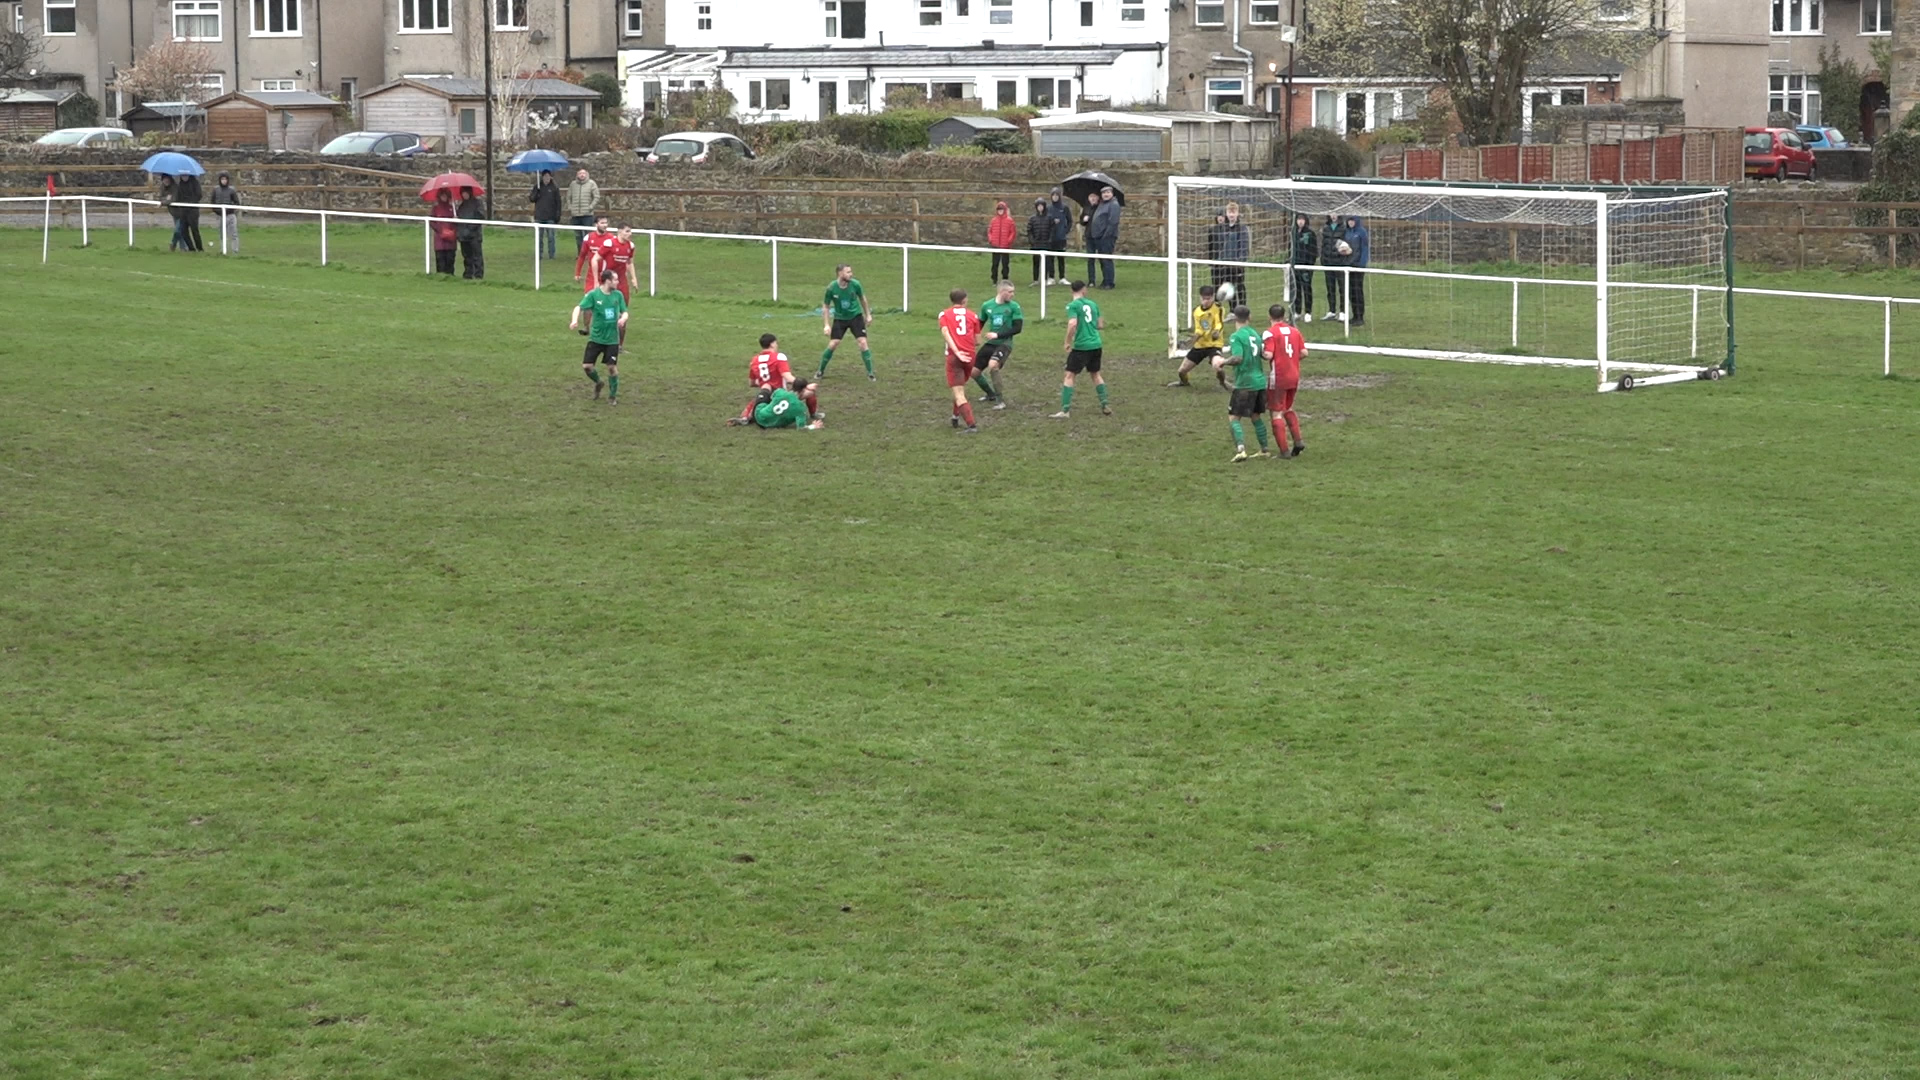 Double save! Carnforth Rangers goalkeeper denies Freckleton with two great saves!